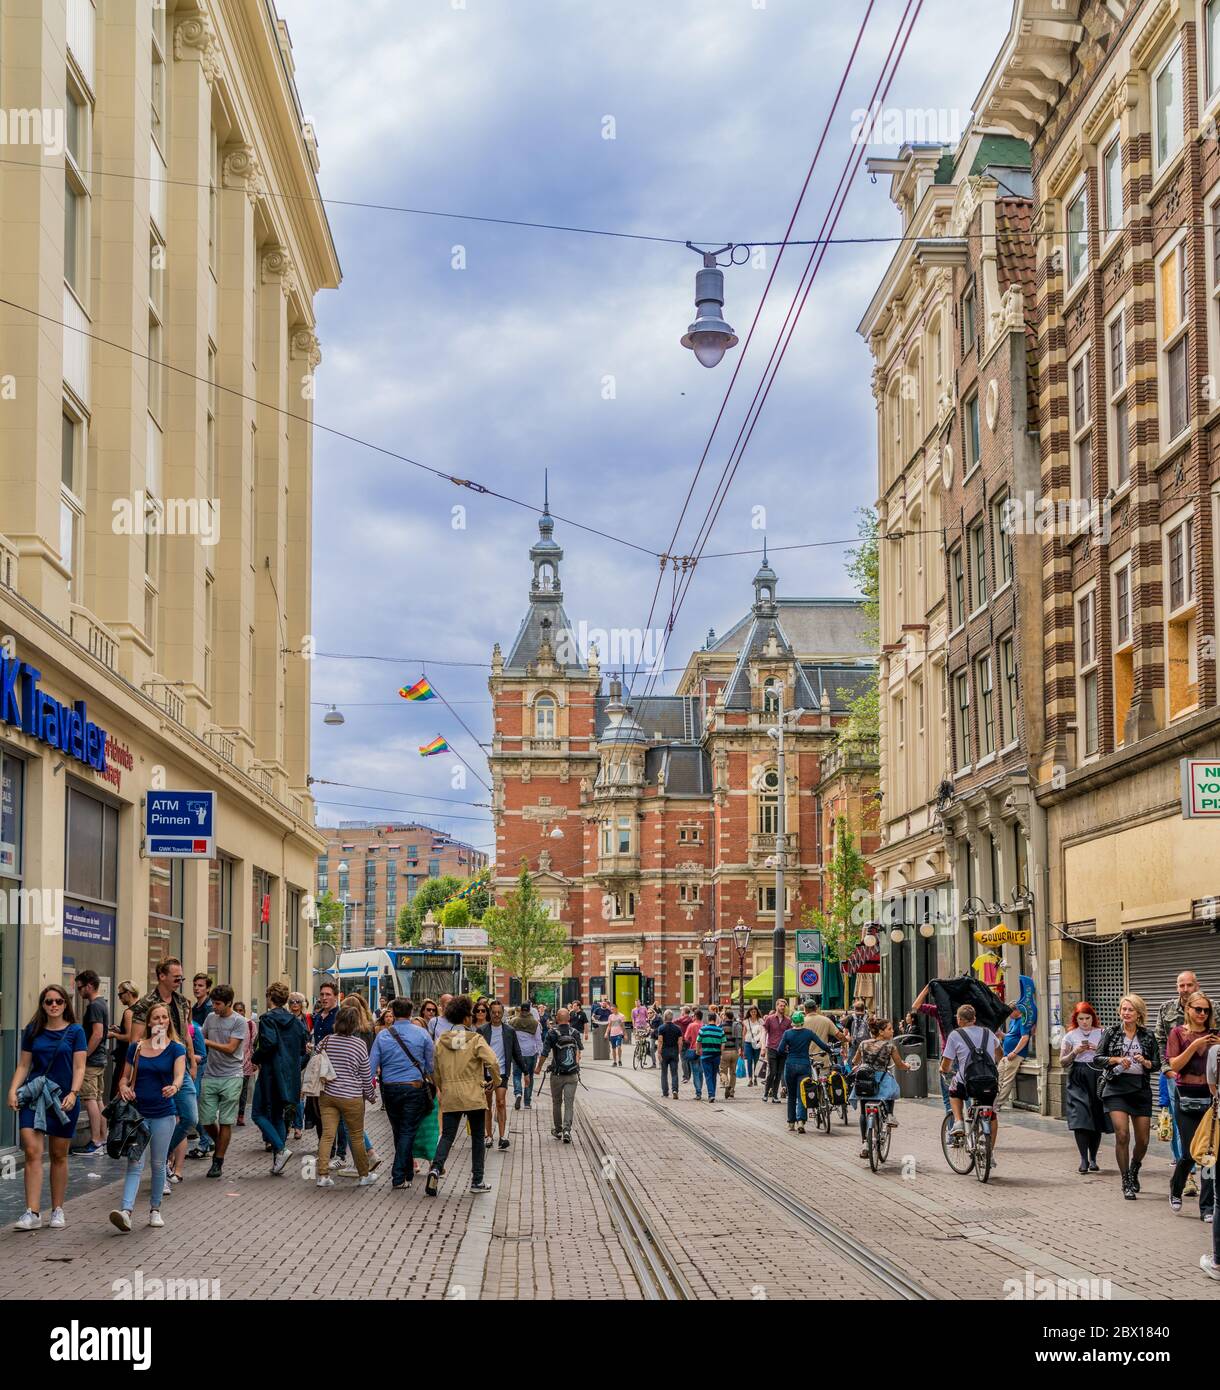 Amsterdam, The Netherlands, August 5 2017: Tourists and locals strawling on the Leidsestraat (Leidse-street) onto the Leidseplein (Leidse-square) Stock Photo